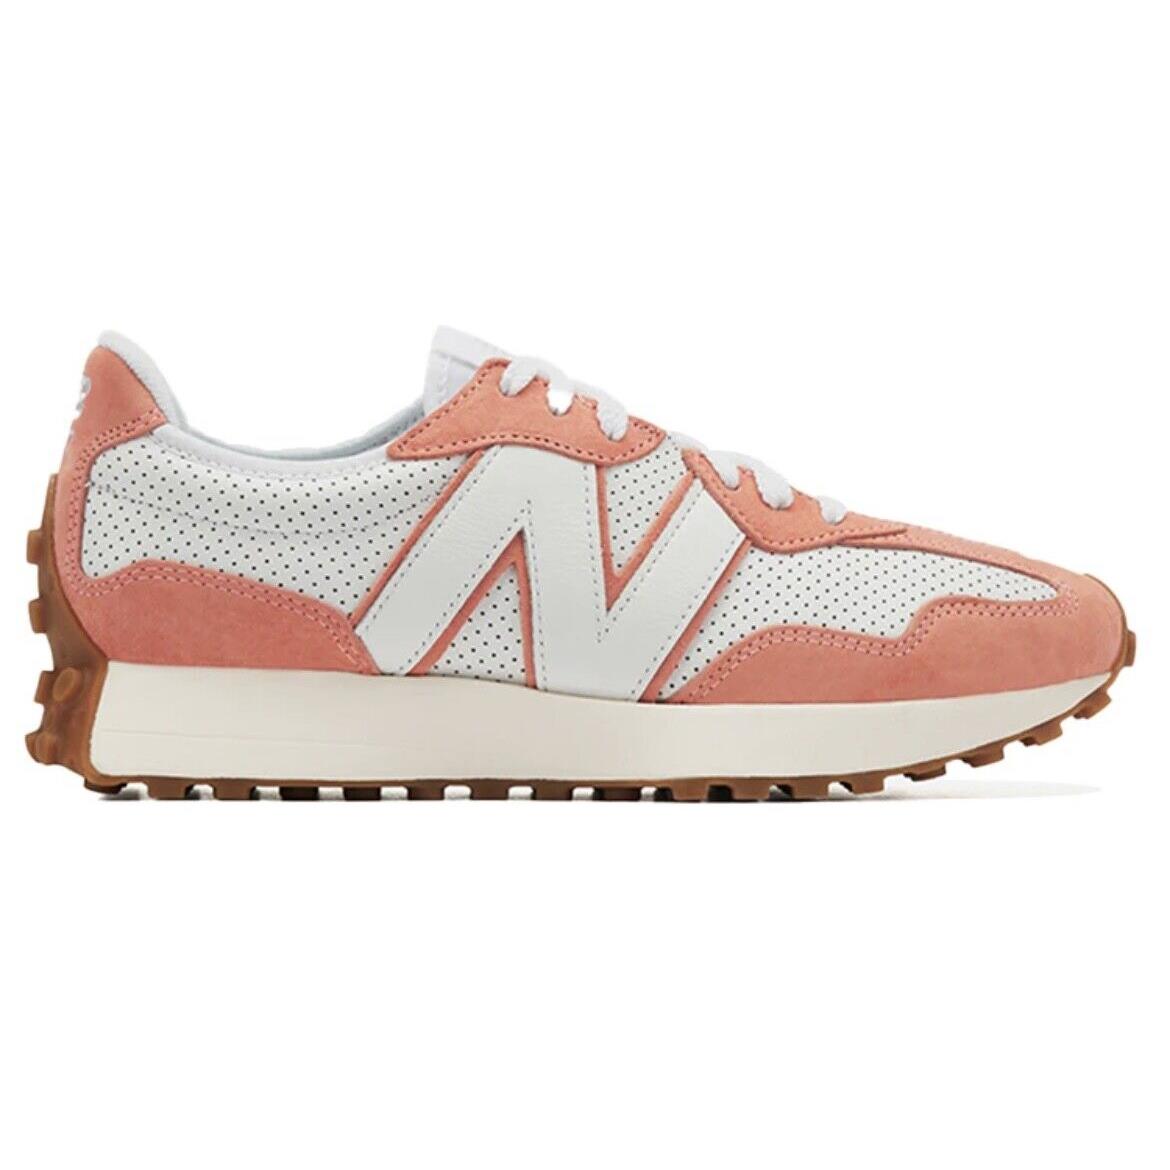 New Balance 327 Men Casual Retro Lifestyle Shoe Pink White Trainer Sneaker New